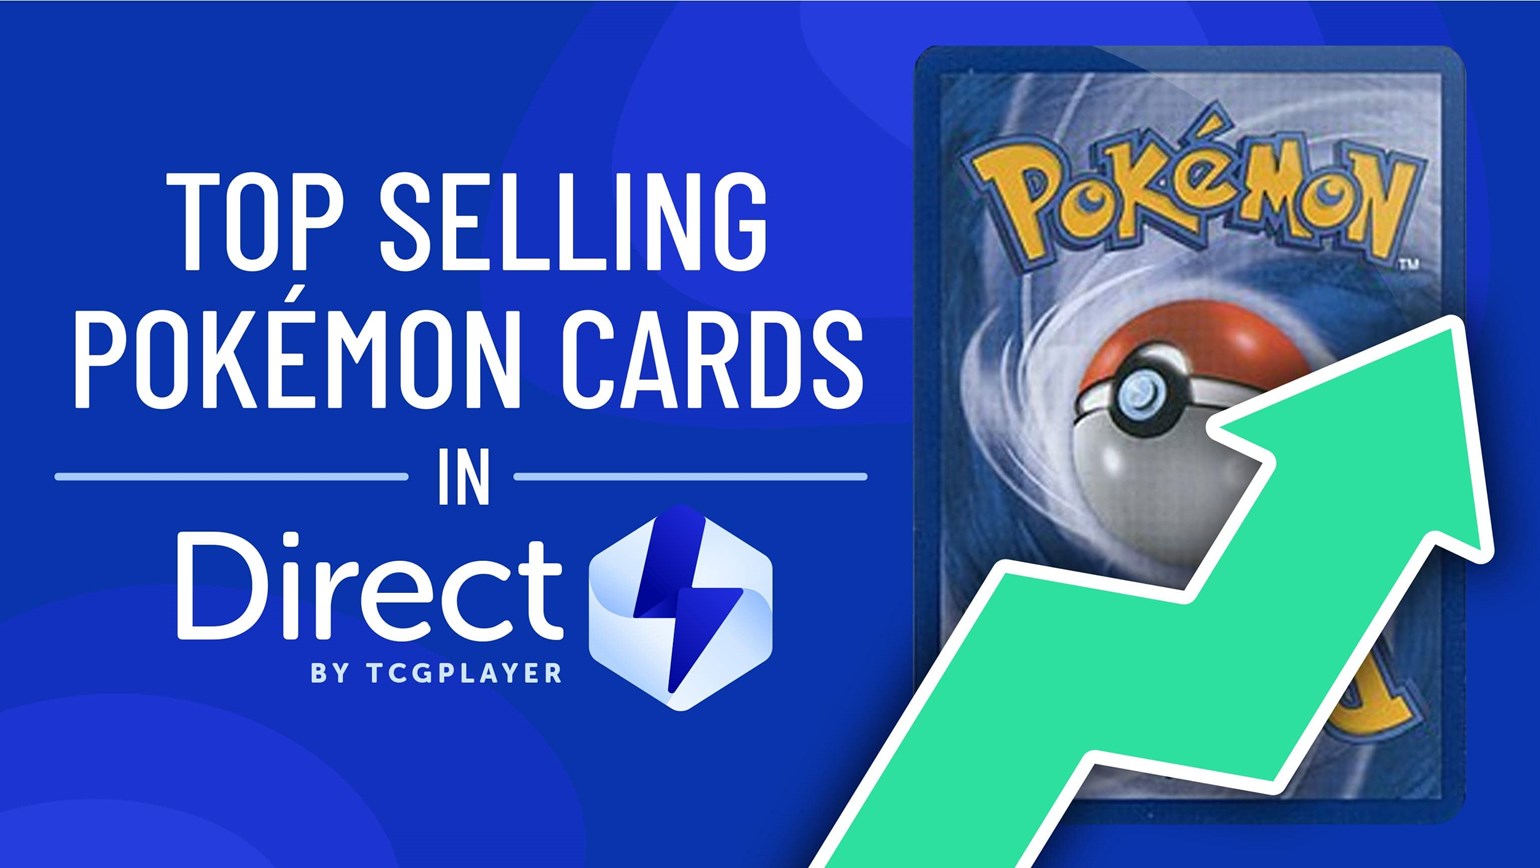 June Top Selling Pokémon Cards Under $25 in Direct by TCGplayer